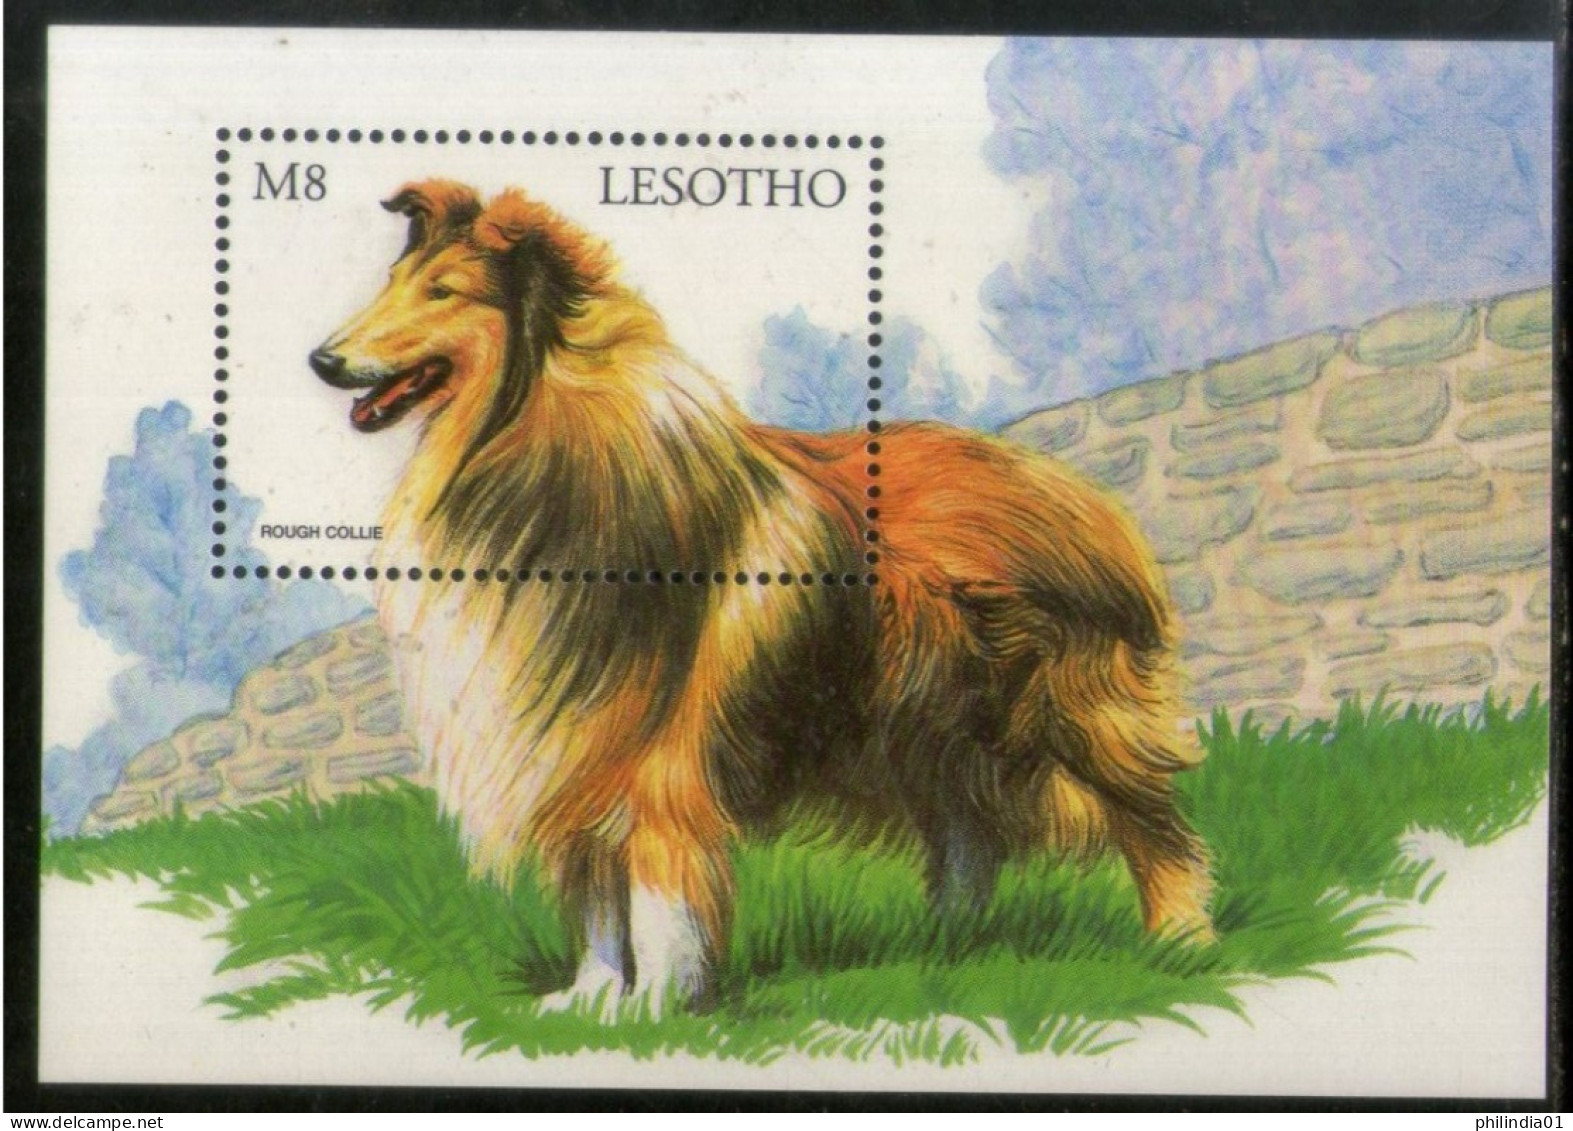 Lesotho 1999 Rough Collie Dogs Of World Pet Animals Sc 1175 M/s MNH # 1039 - Dogs